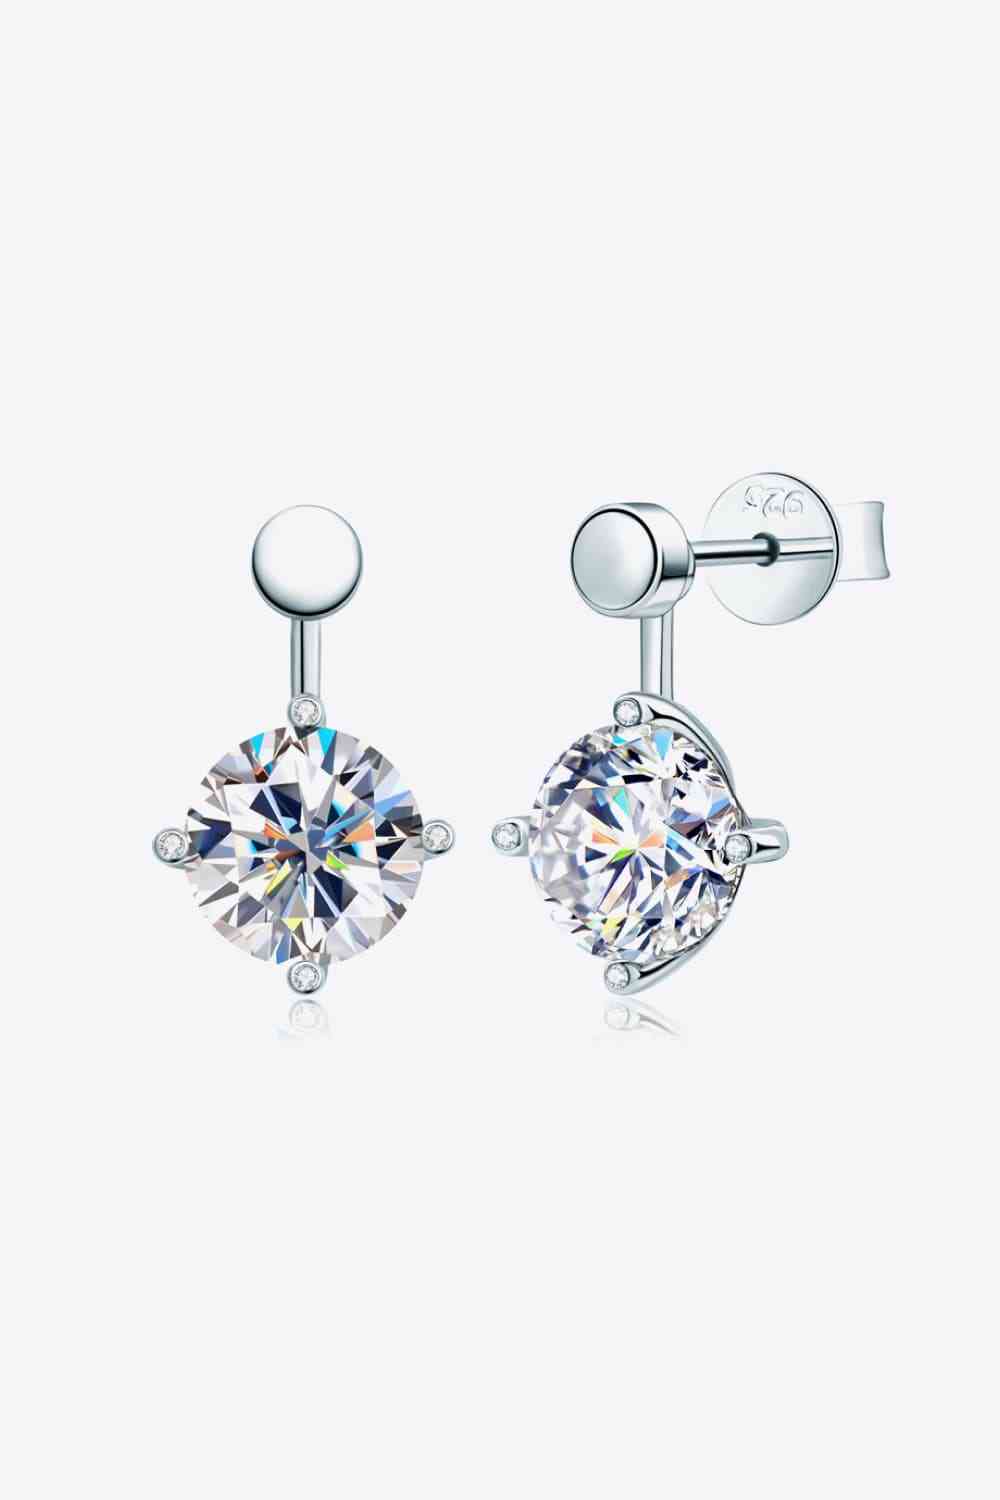 Adored 4 Carat Moissanite Drop Earrings Silver One Size